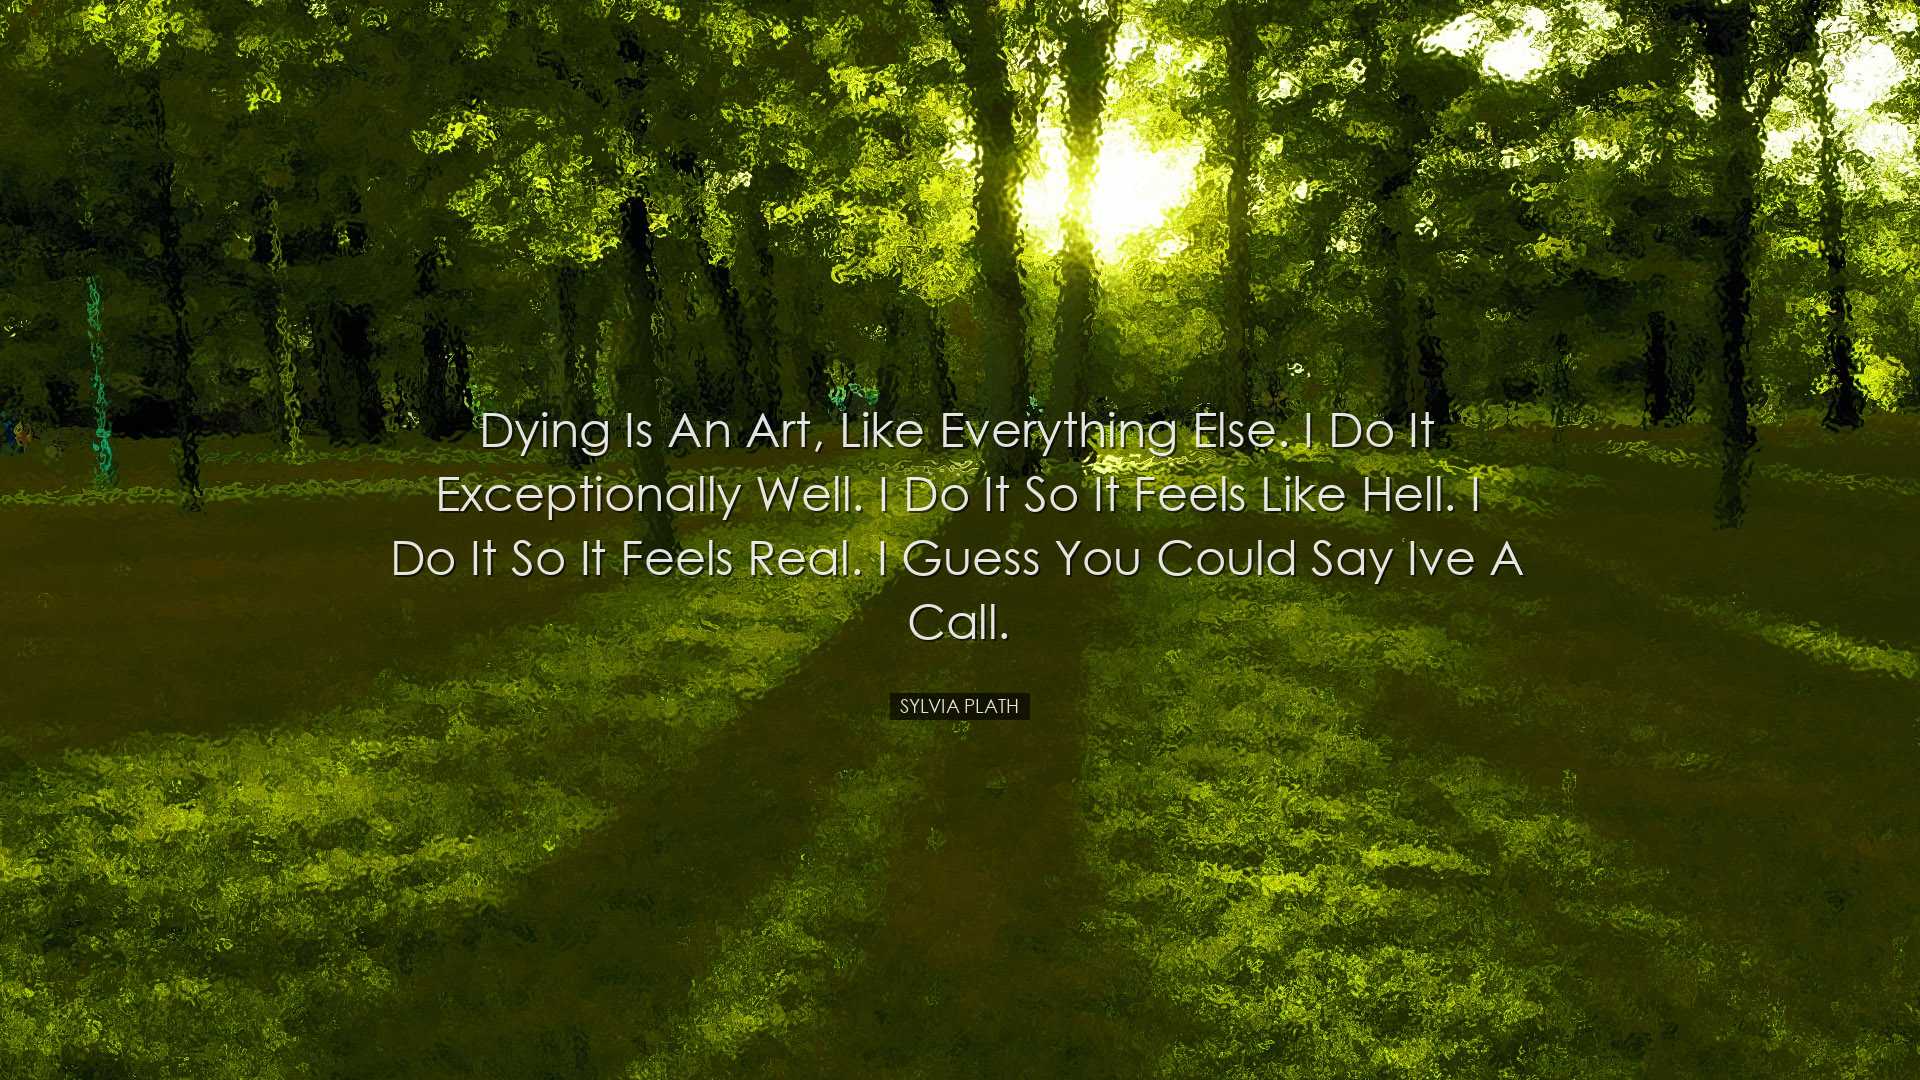 Dying is an art, like everything else. I do it exceptionally well.